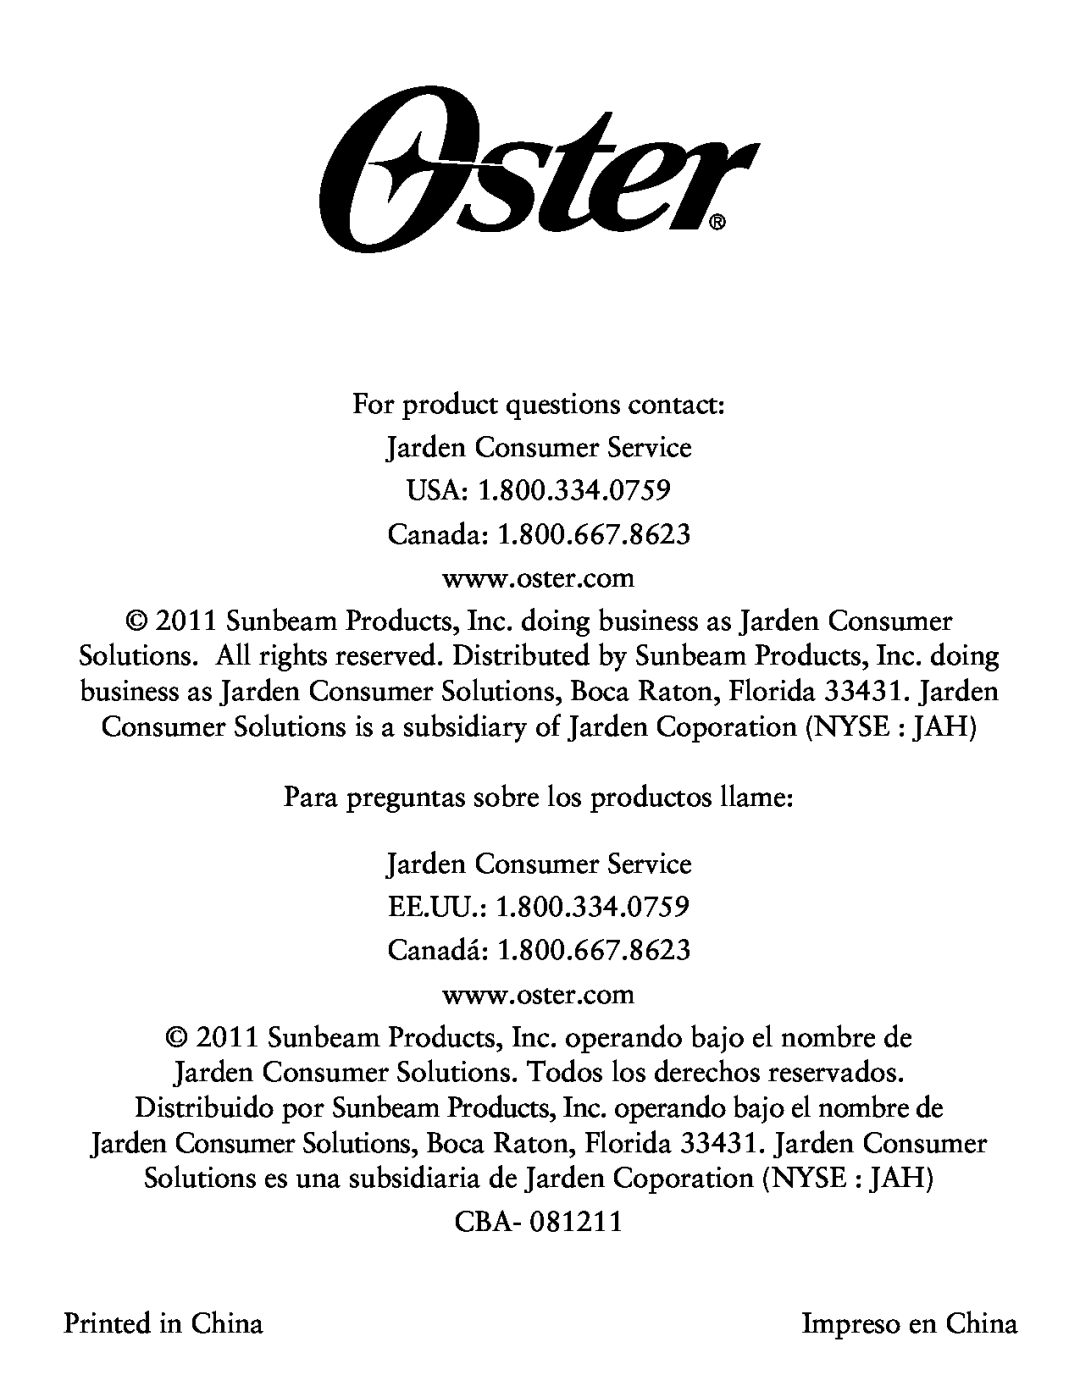 Oster TSSTTVDG01, Digital Countertop Oven user manual For product questions contact Jarden Consumer Service USA Canada 